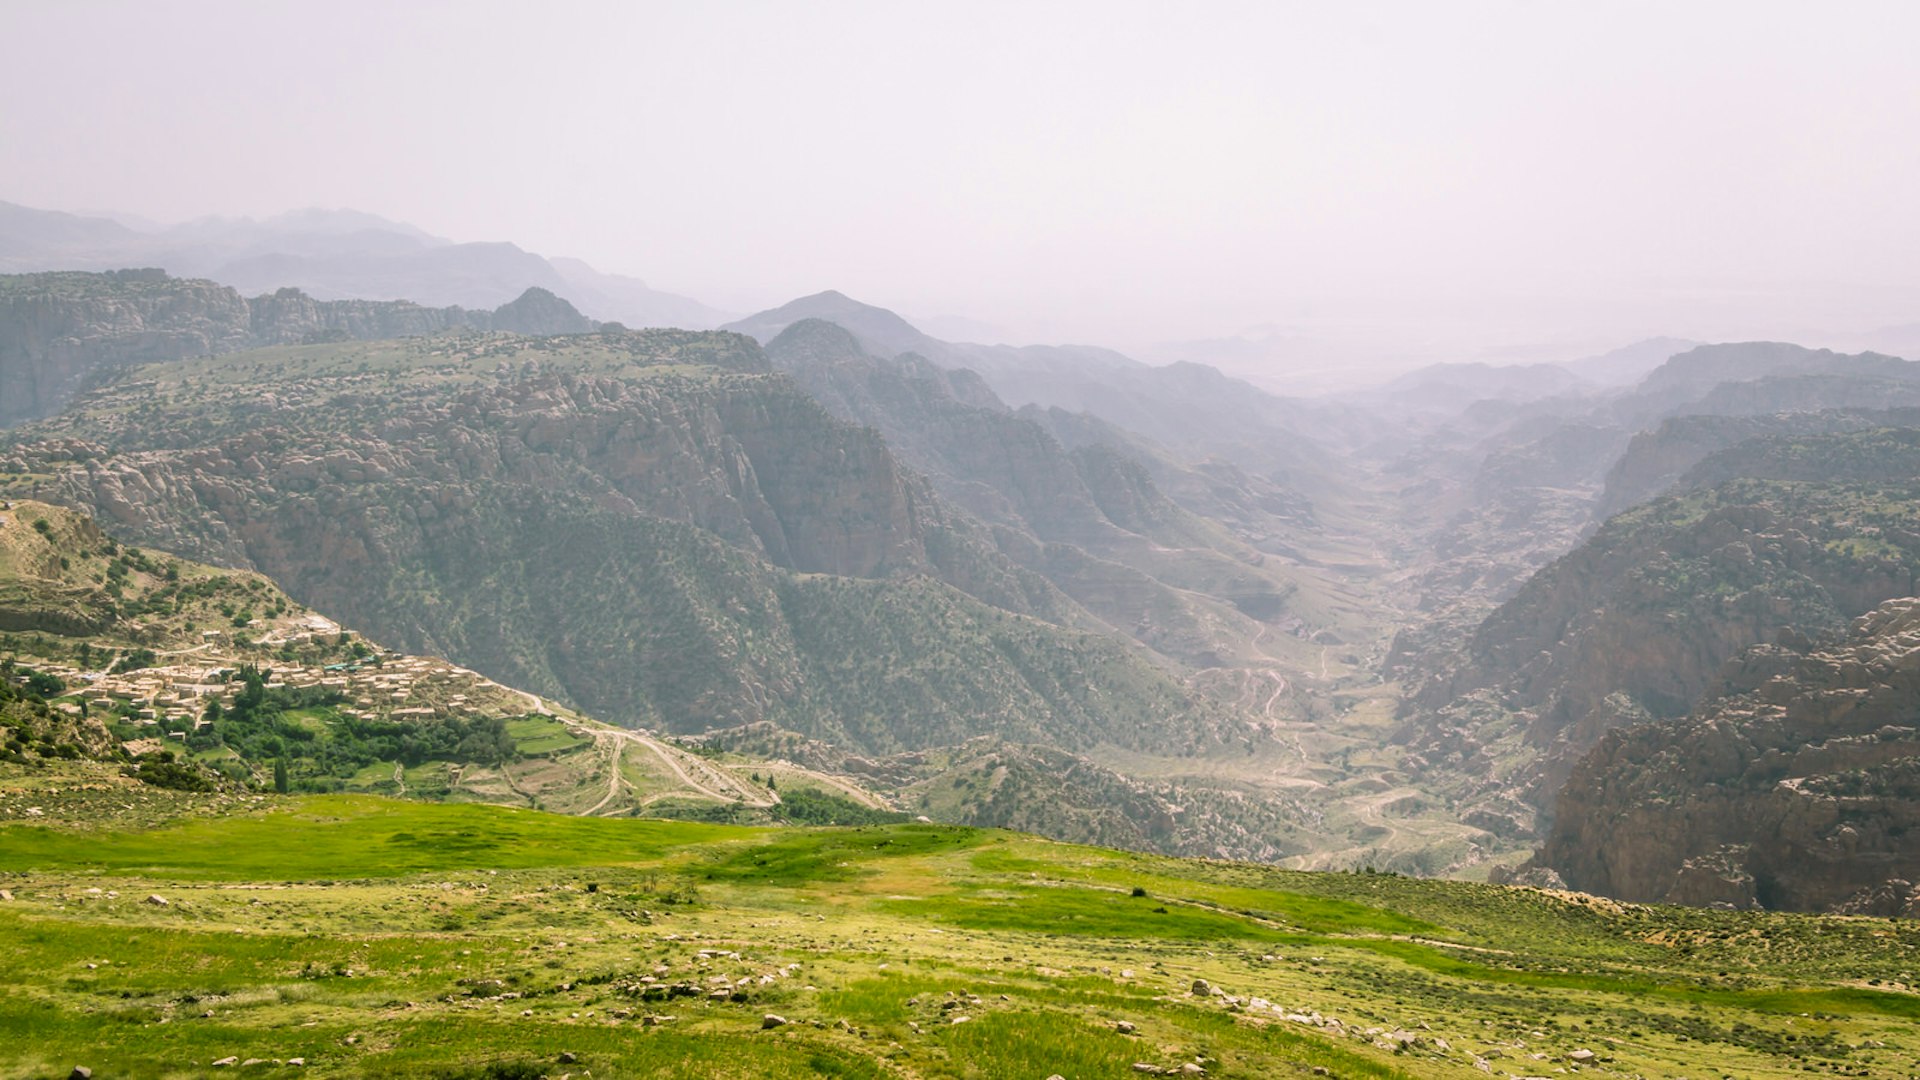 View of Wadi Dana and a hiking trail leading into the valley, Jordan